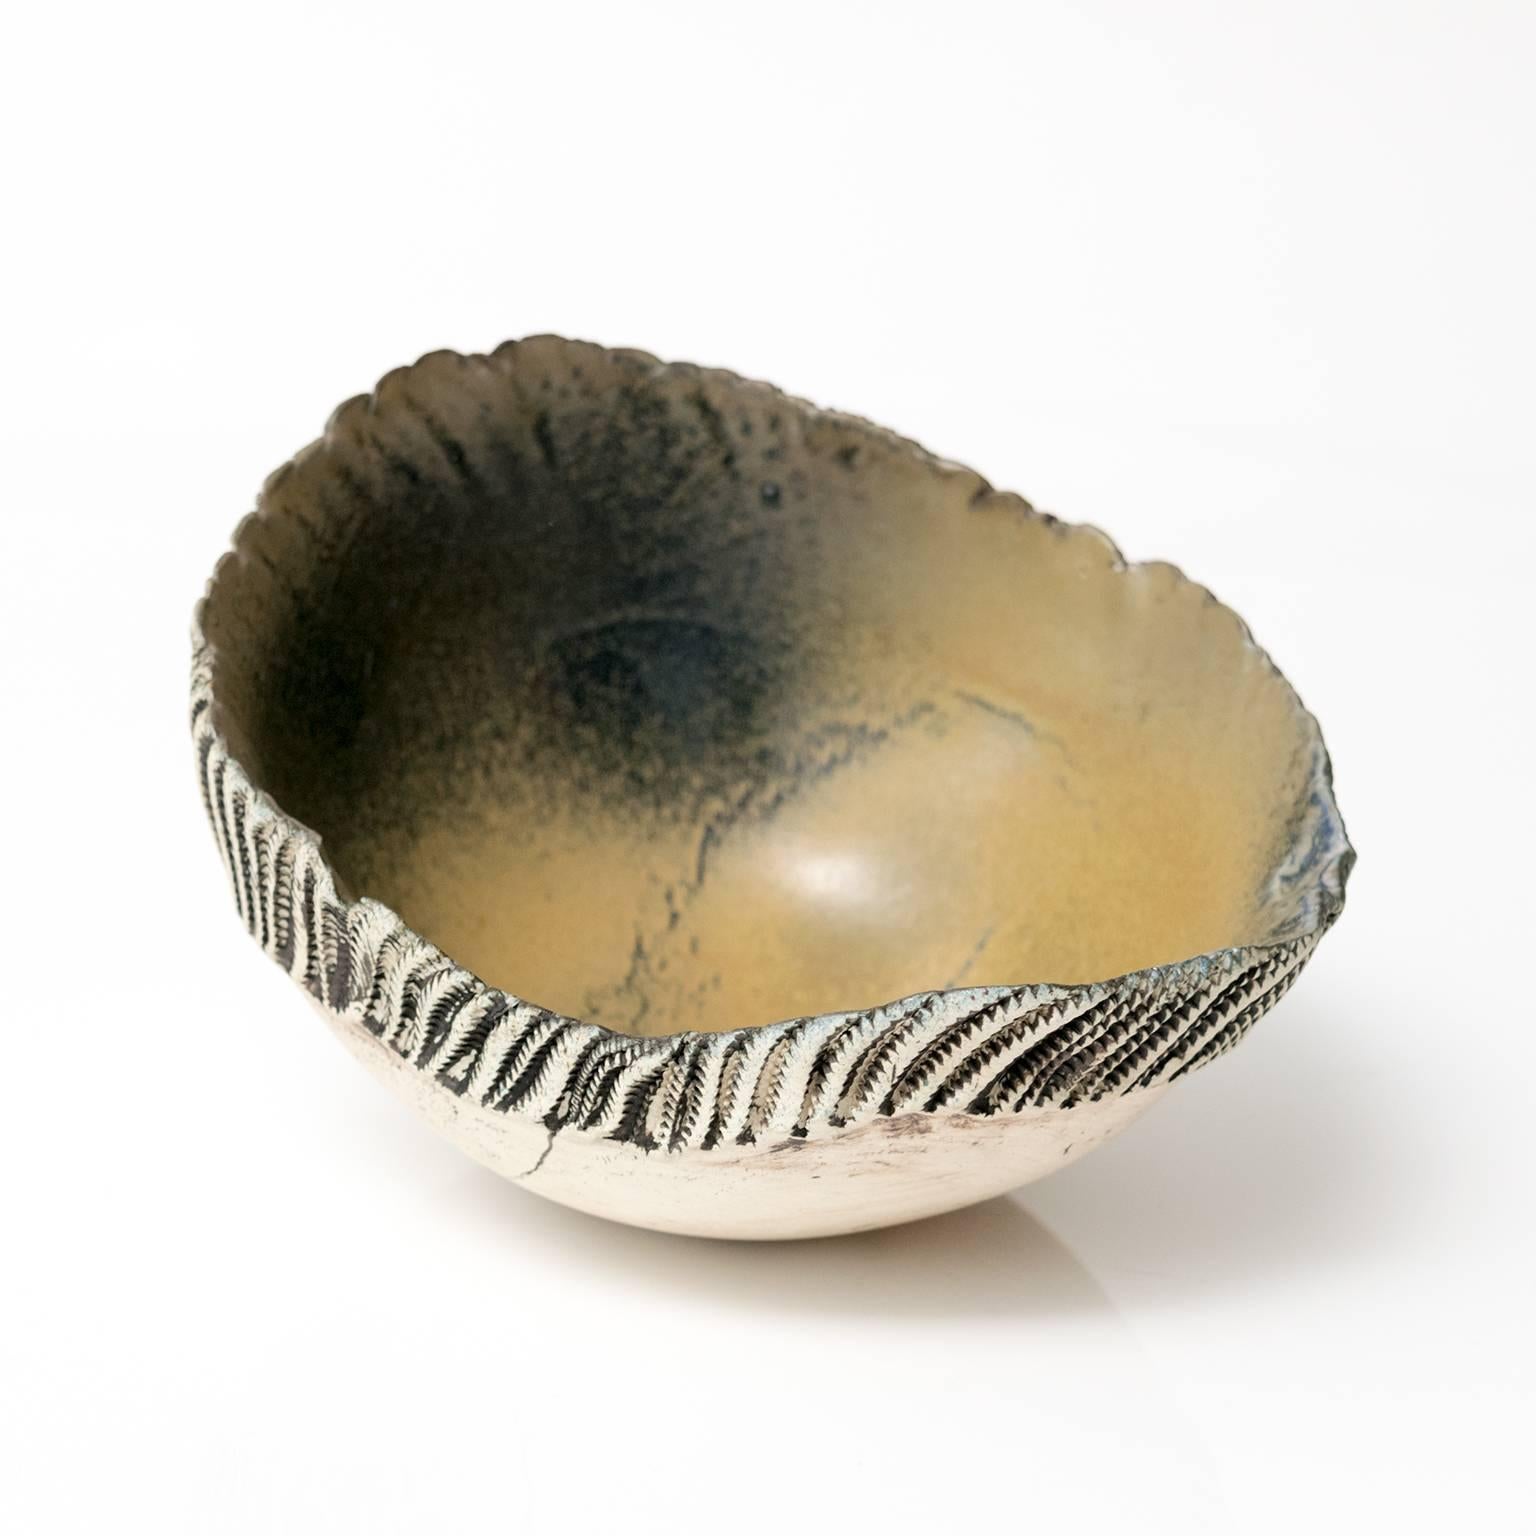 A unique Scandinavian Modern hand built and glazed bowl by artist Bengt Berglund for Gustavsberg Studio, 1960-1977. The exterior of the bowl is partially glazed, the interior glazed in blue-greens.
 
Measures: Diameter 7.25, height: